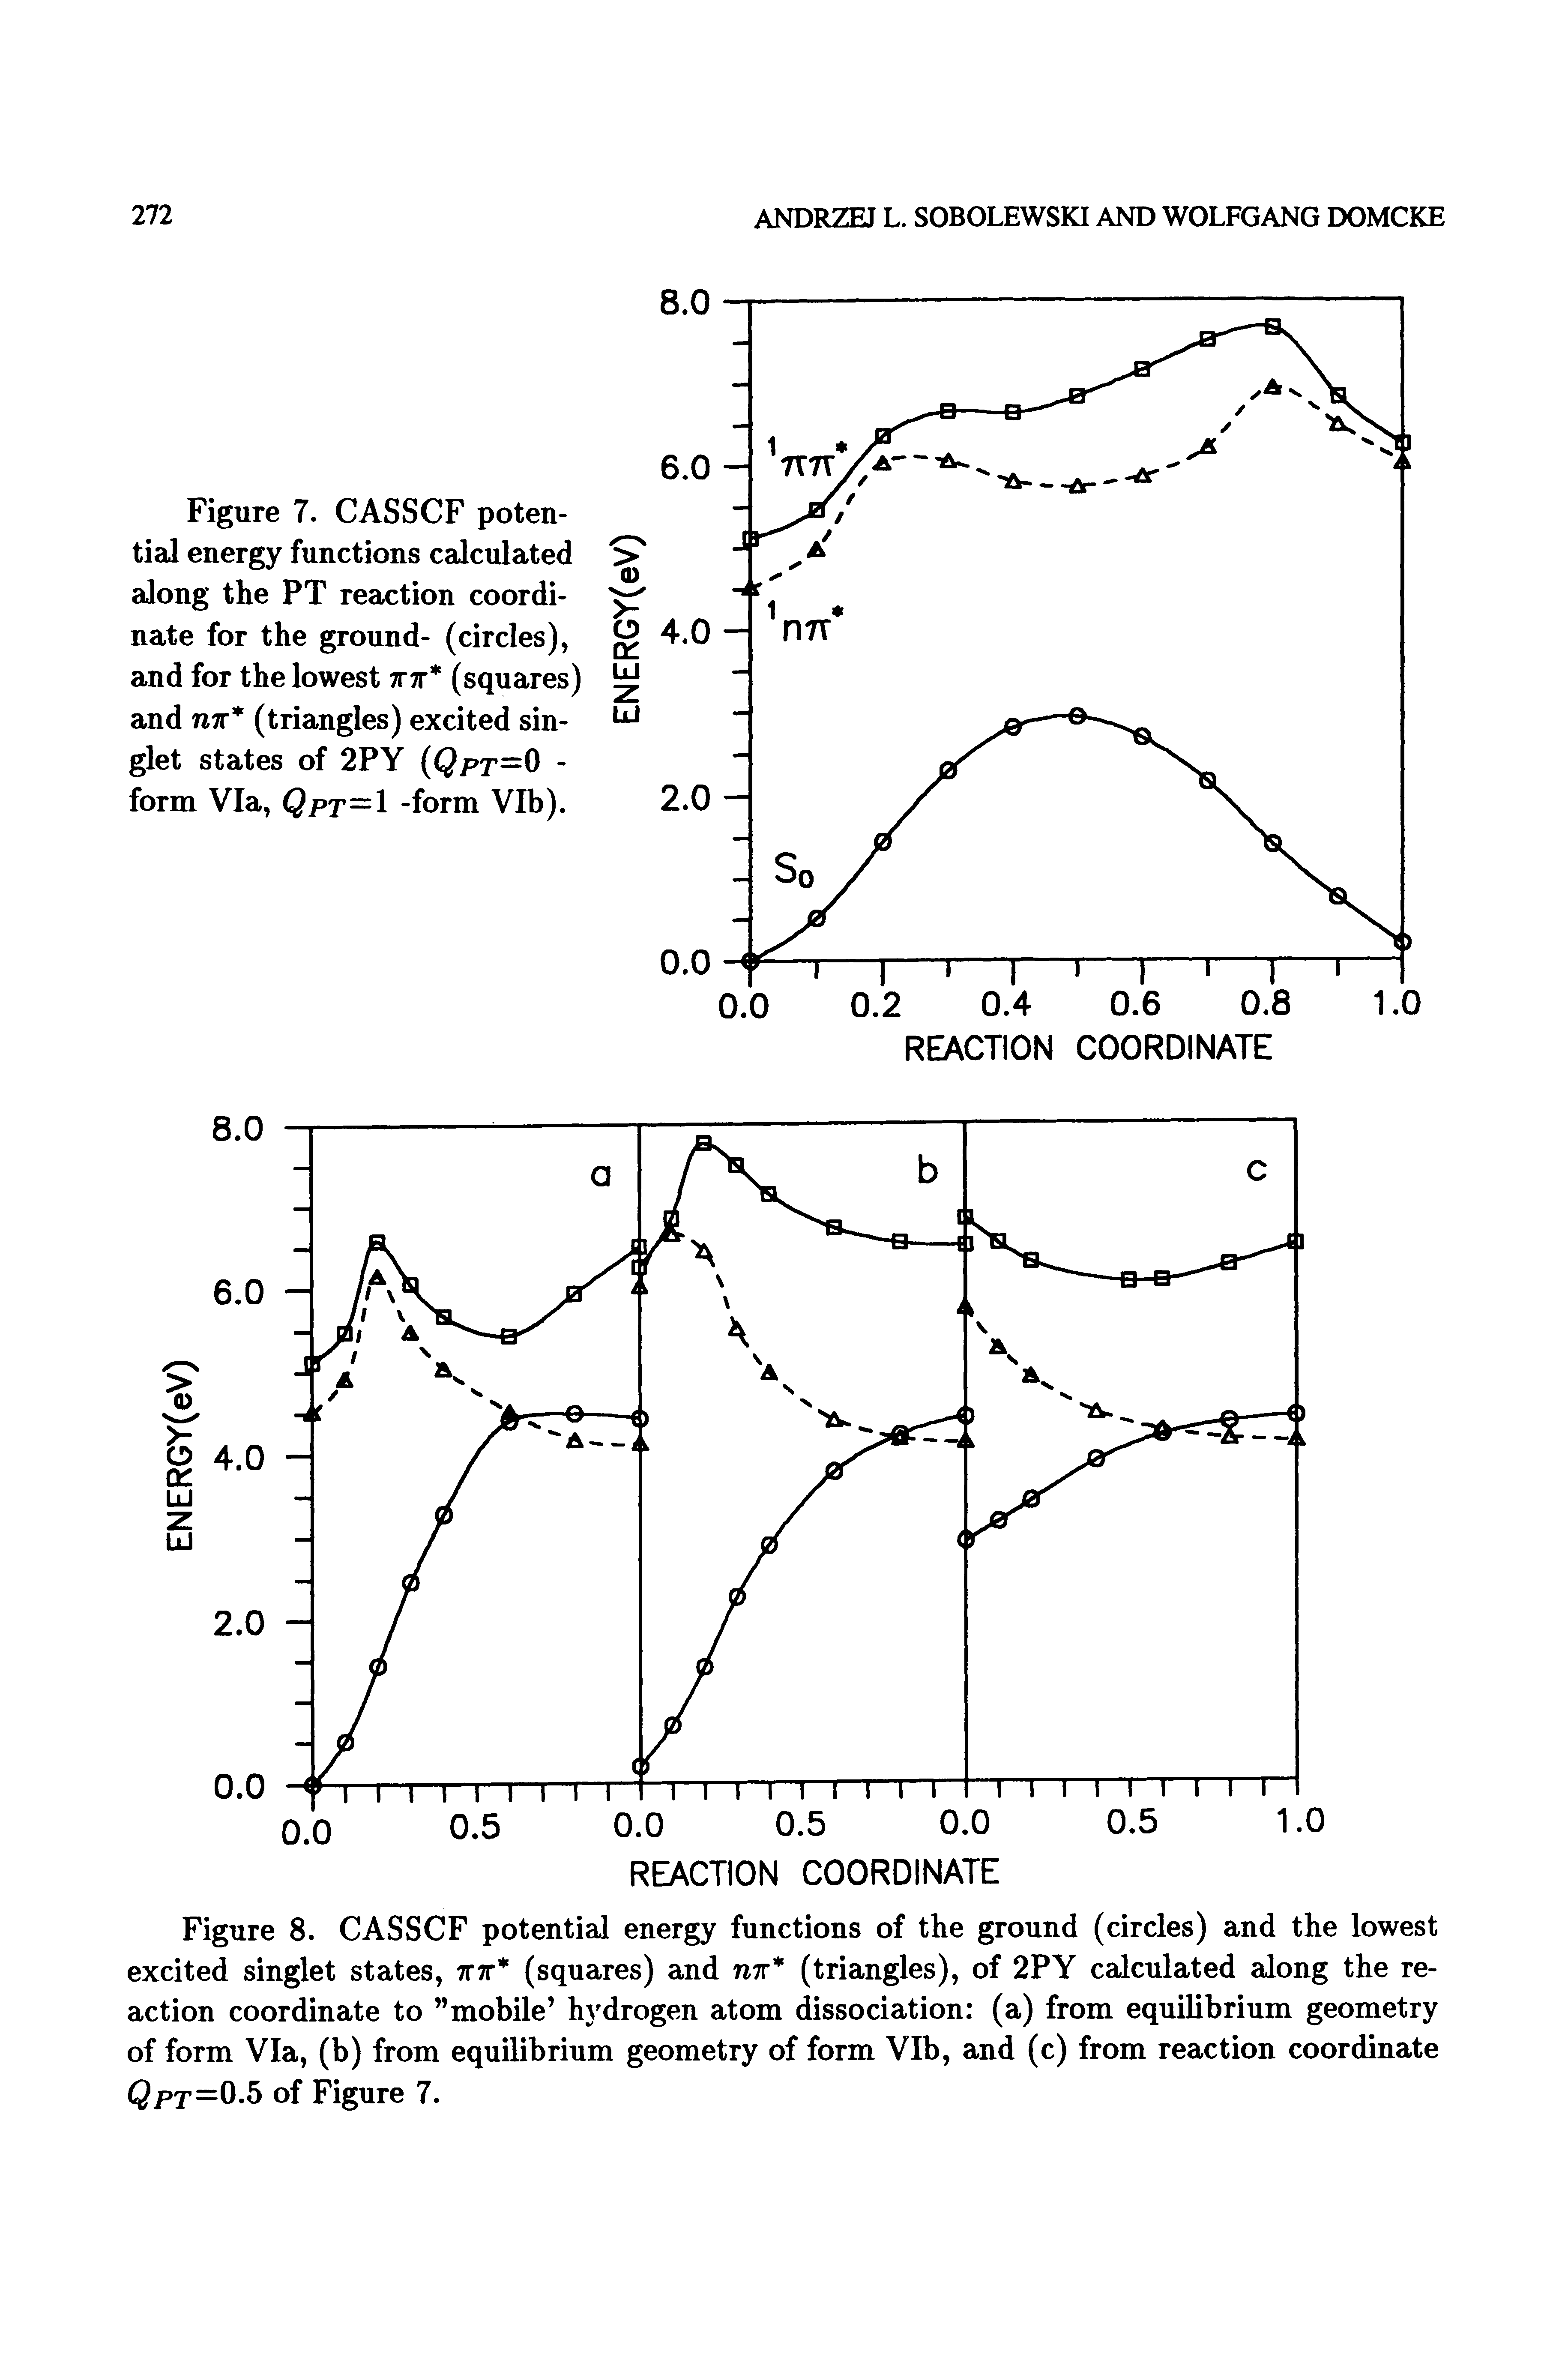 Figure 8. CASSCF potential energy functions of the ground (circles) and the lowest excited singlet states, tttt (squares) and titt (triangles), of 2PY calculated along the reaction coordinate to mobile hydrogen atom dissociation (a) from equilibrium geometry of form Via, (b) from equilibrium geometry of form VIb, and (c) from reaction coordinate Qpj=0.5 of Figure 7.